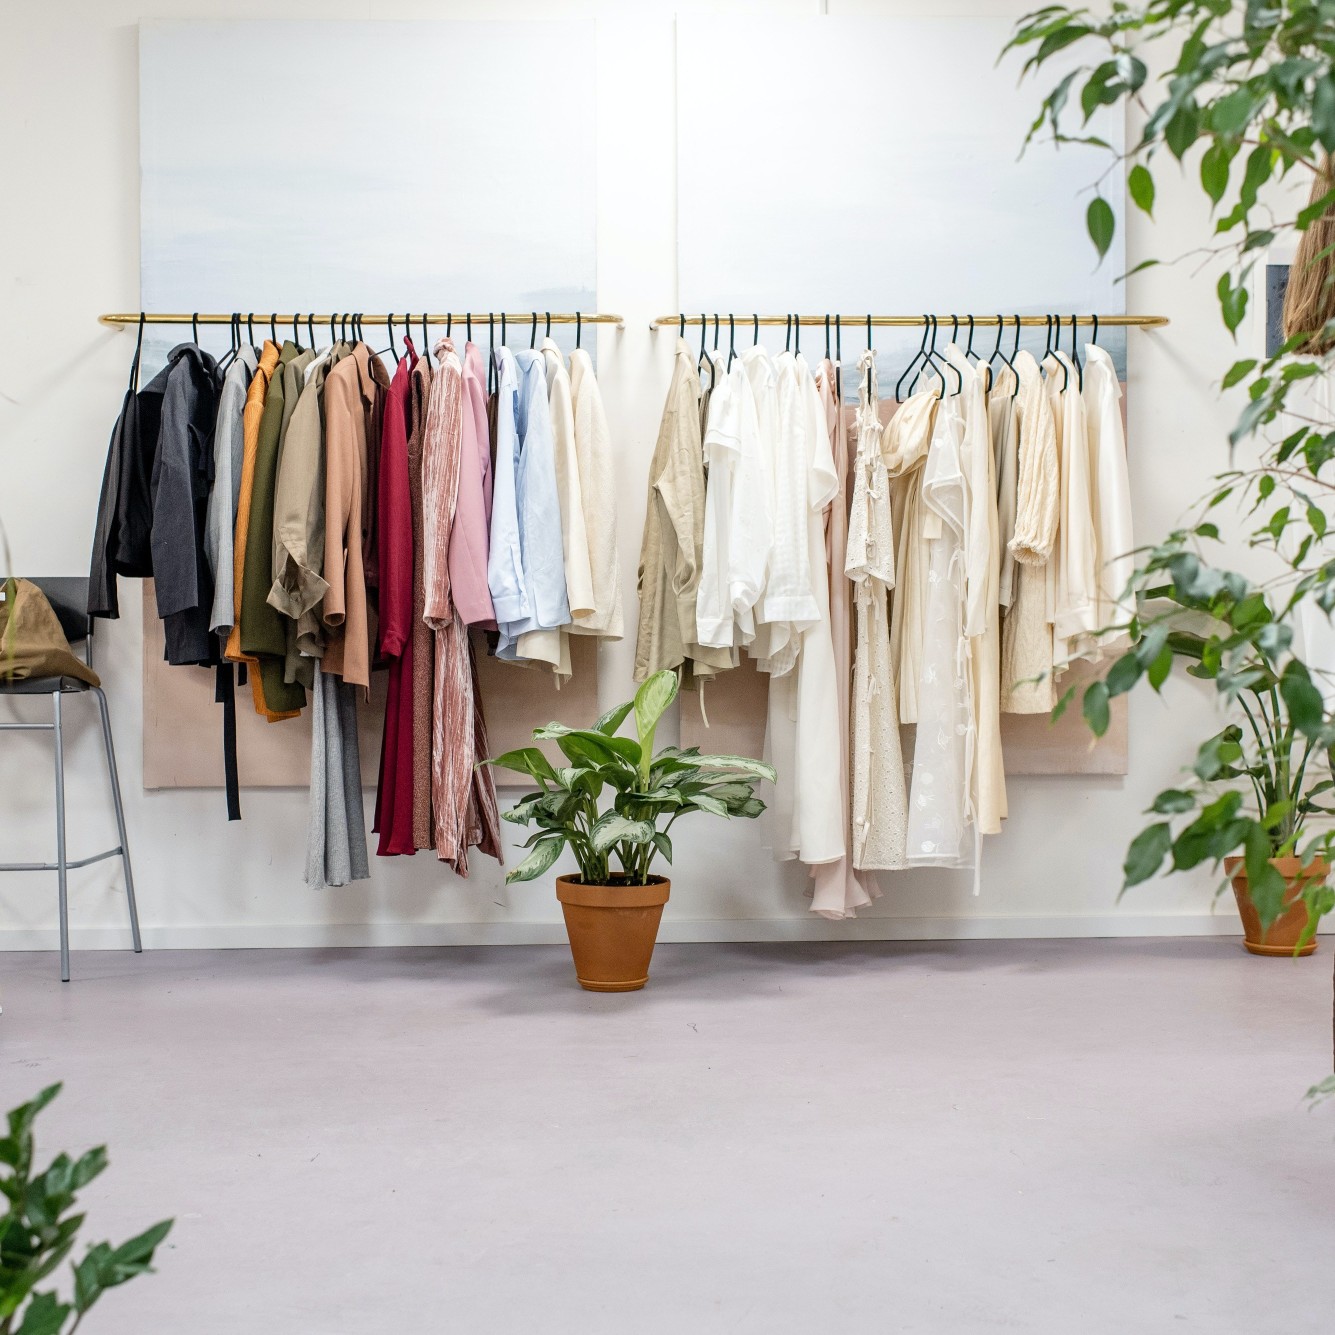 Where to Buy Wholesale Clothing for a Boutique